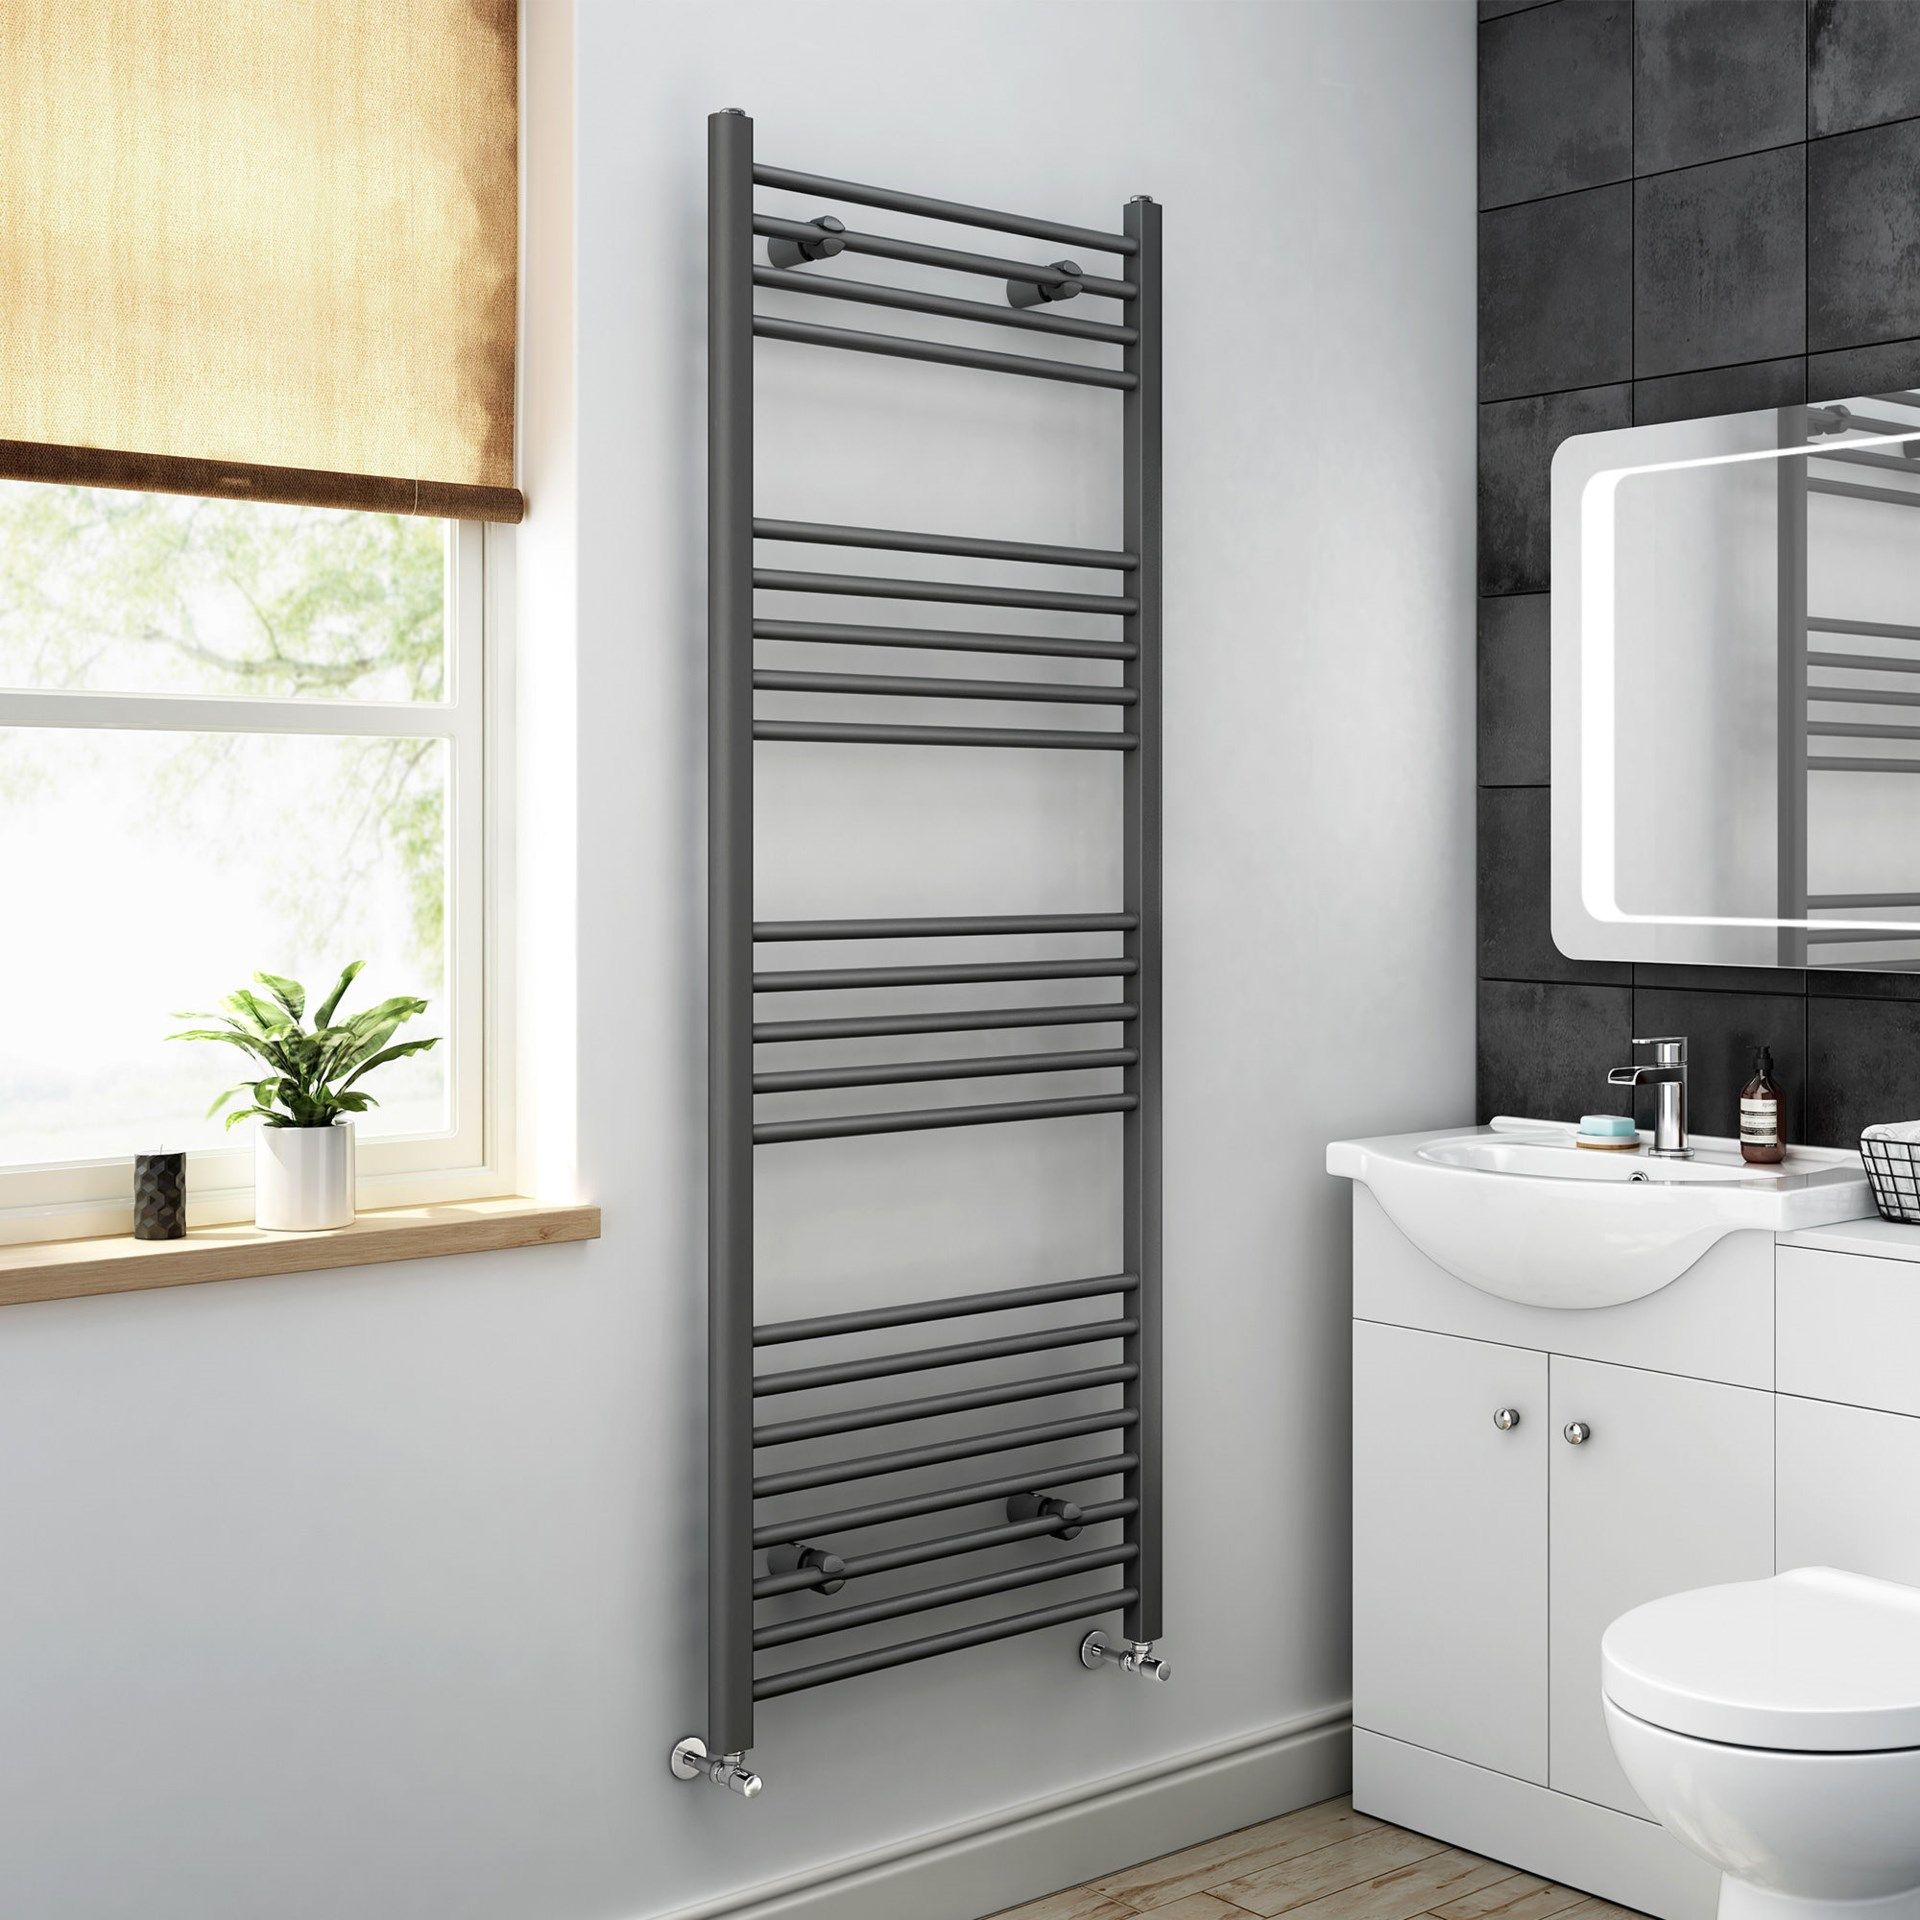 6 BRAND NEW BOXED 1600x600mm - 20mm Tubes - Anthracite Heated Straight Rail Ladder Towel Radiator.